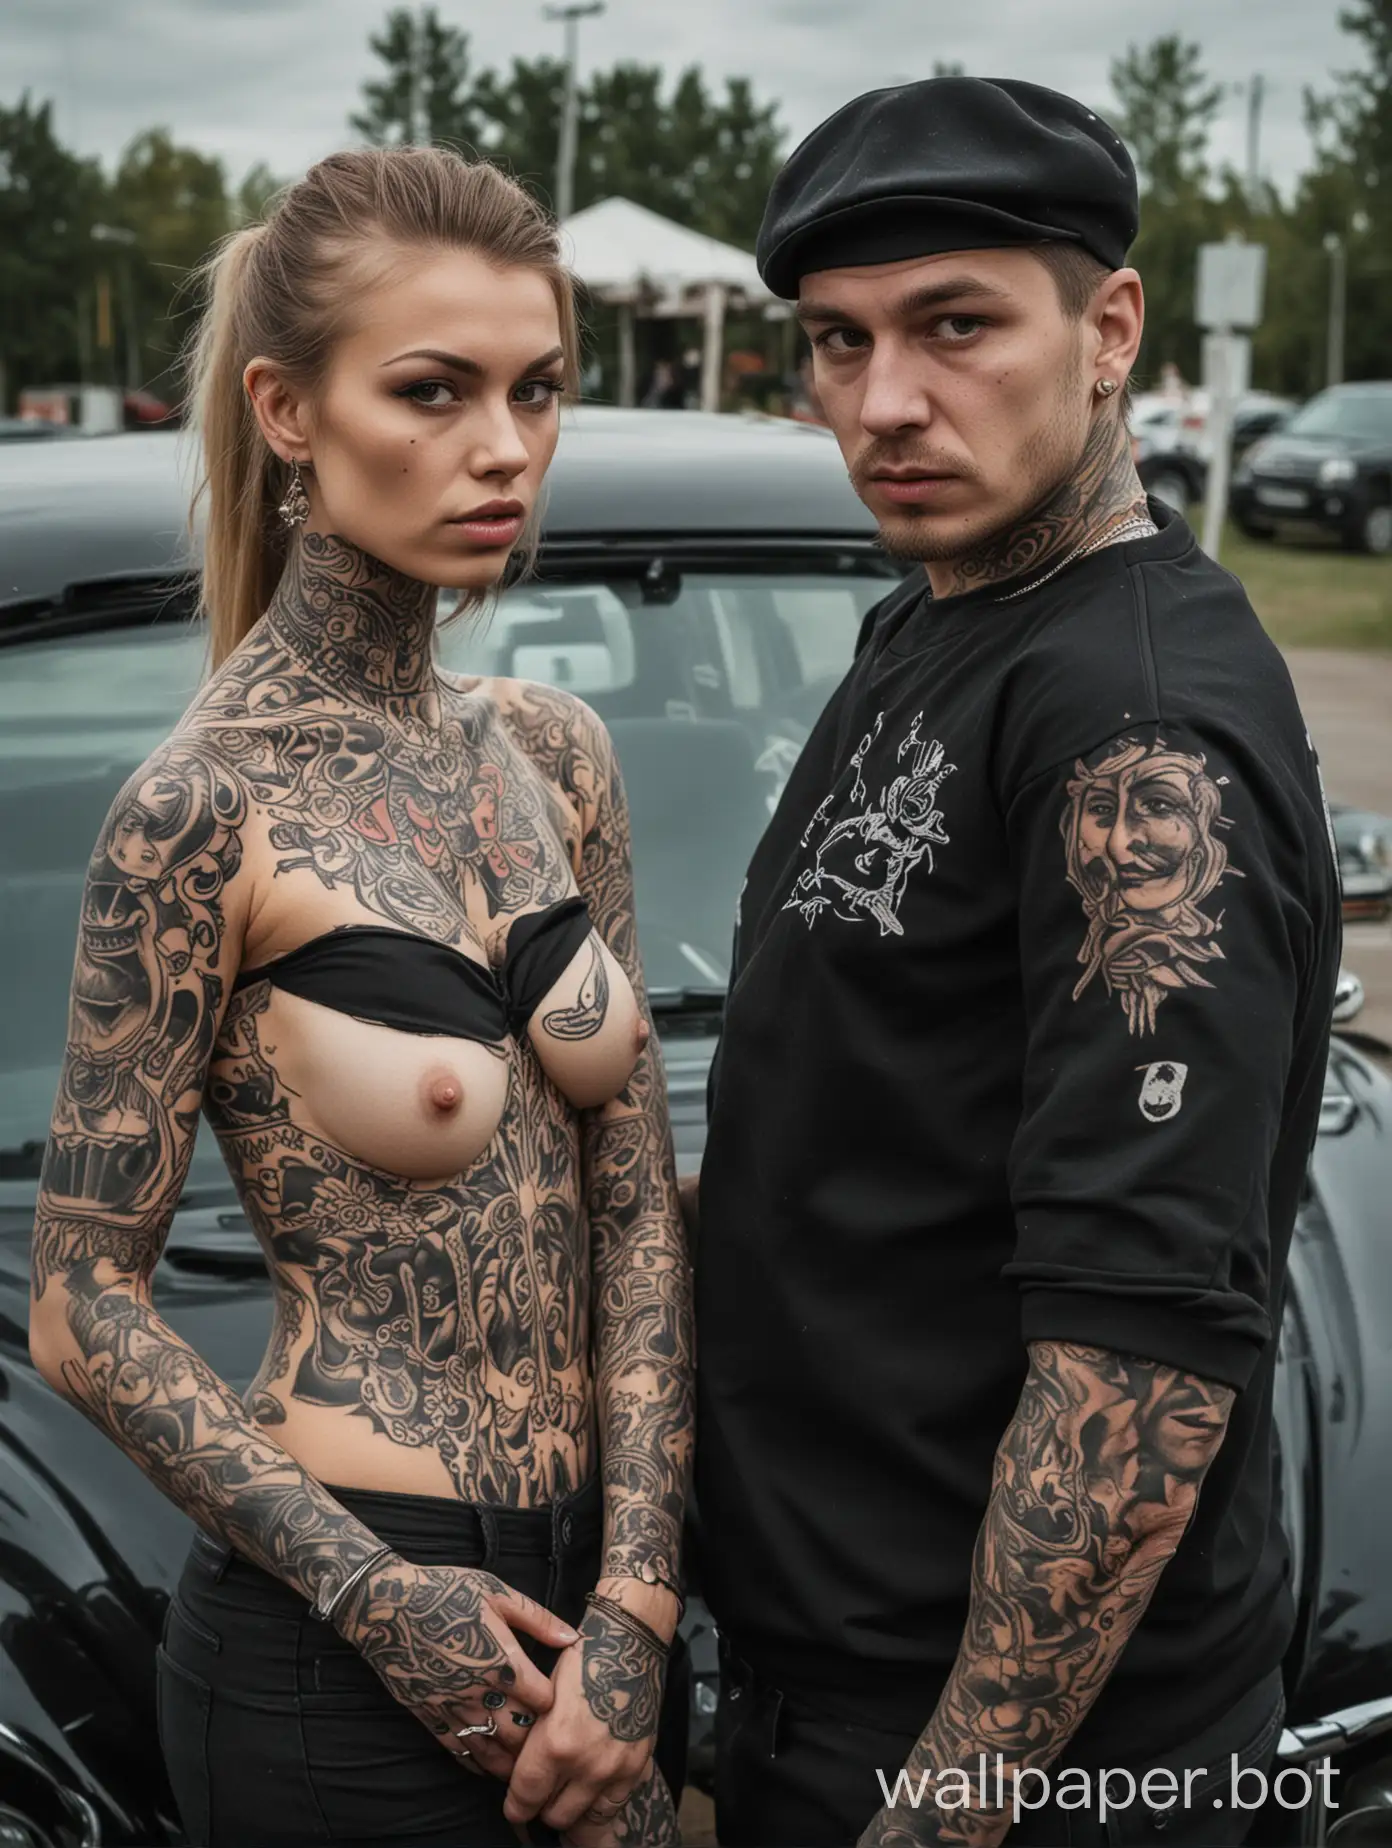 Russian-Mafia-Couple-with-Gelendvagen-Car-and-Tattoos